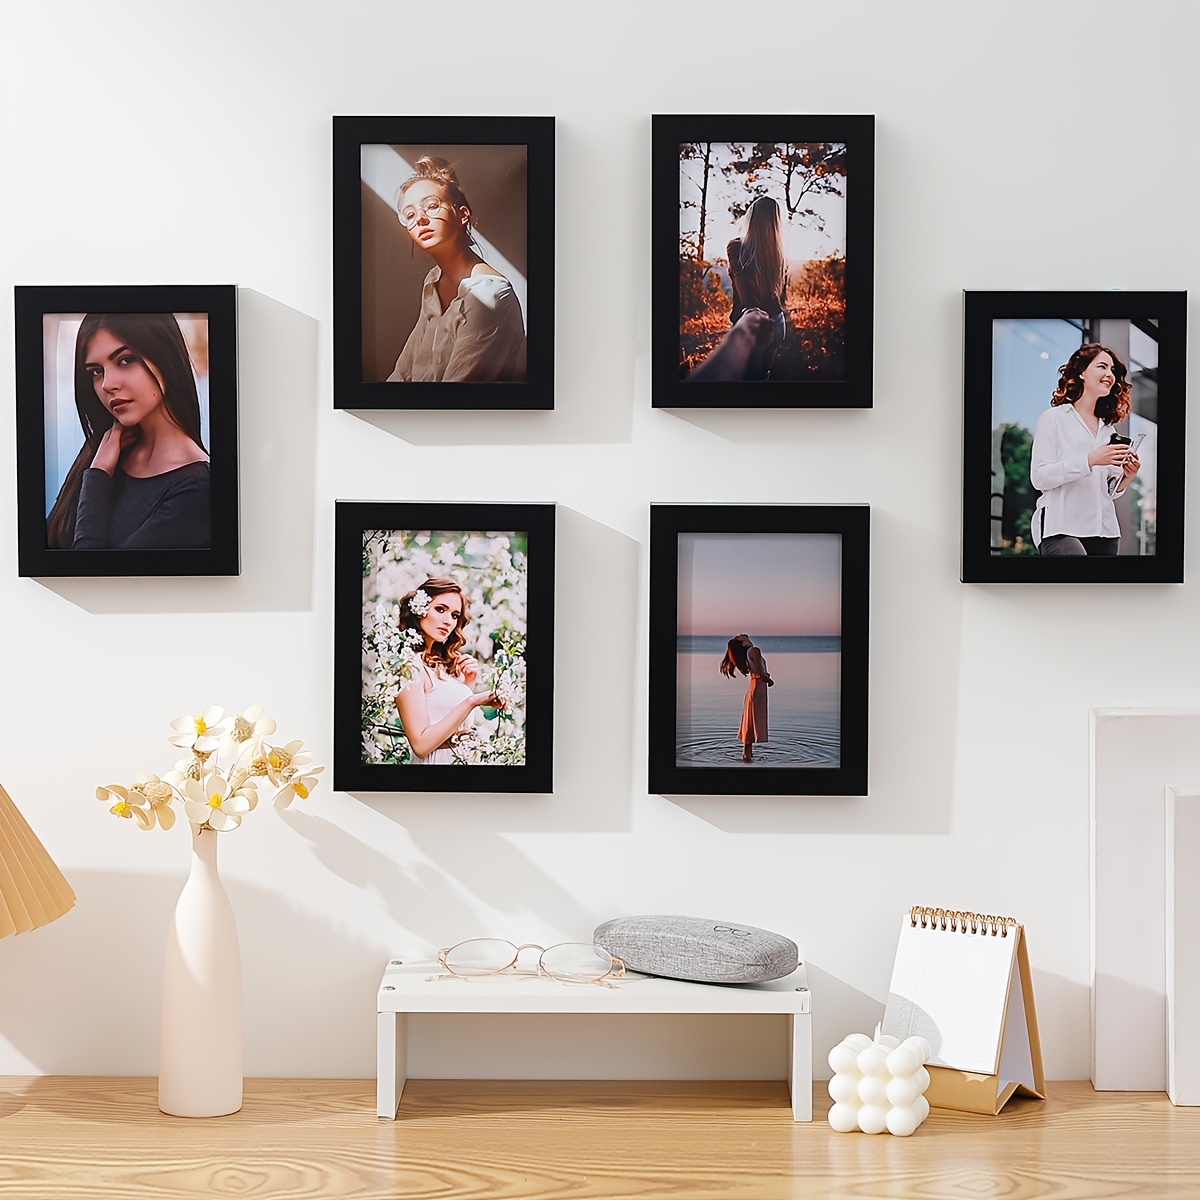 Black and White 4x6 Collage Frame - Holds 4 4x6 Photos (2 Pack